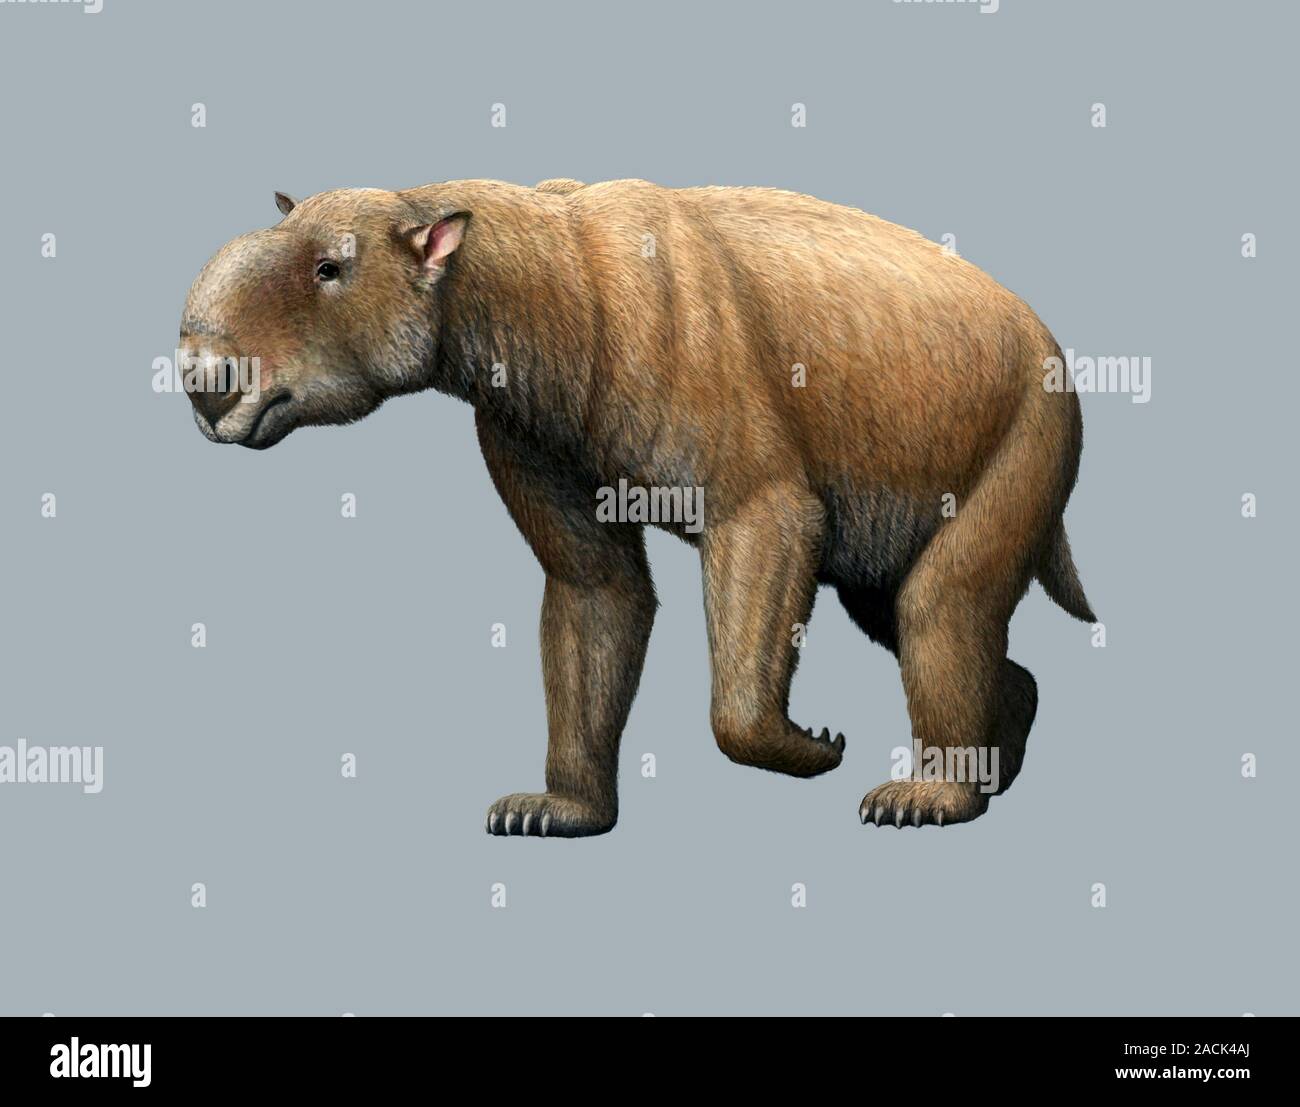 Prehistoric giant wombat. Computer artwork of a Diprotodon. These Australian mammals, also known as rhinoceros or giant wombats, was the largest known Stock Photo